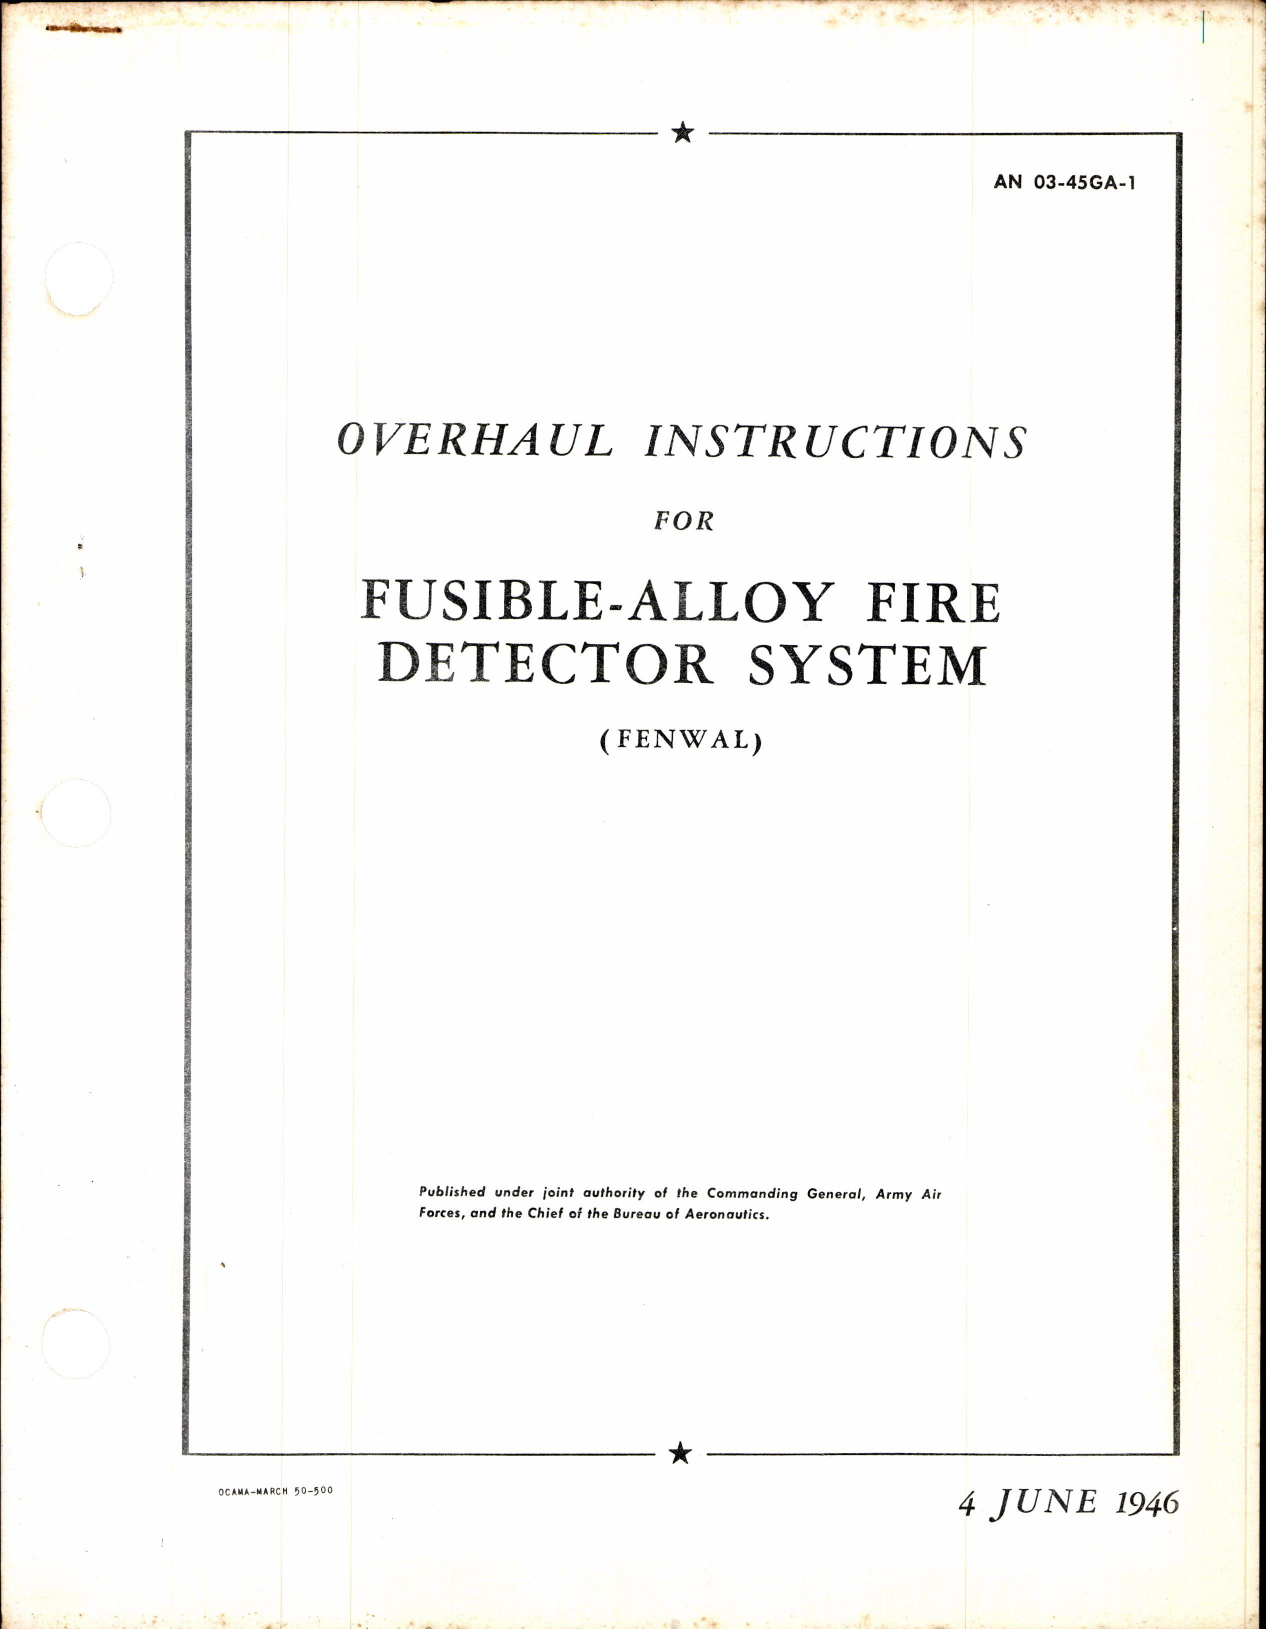 Sample page 1 from AirCorps Library document: Overhaul Instructions for Fusible-Alloy Fire Detector System